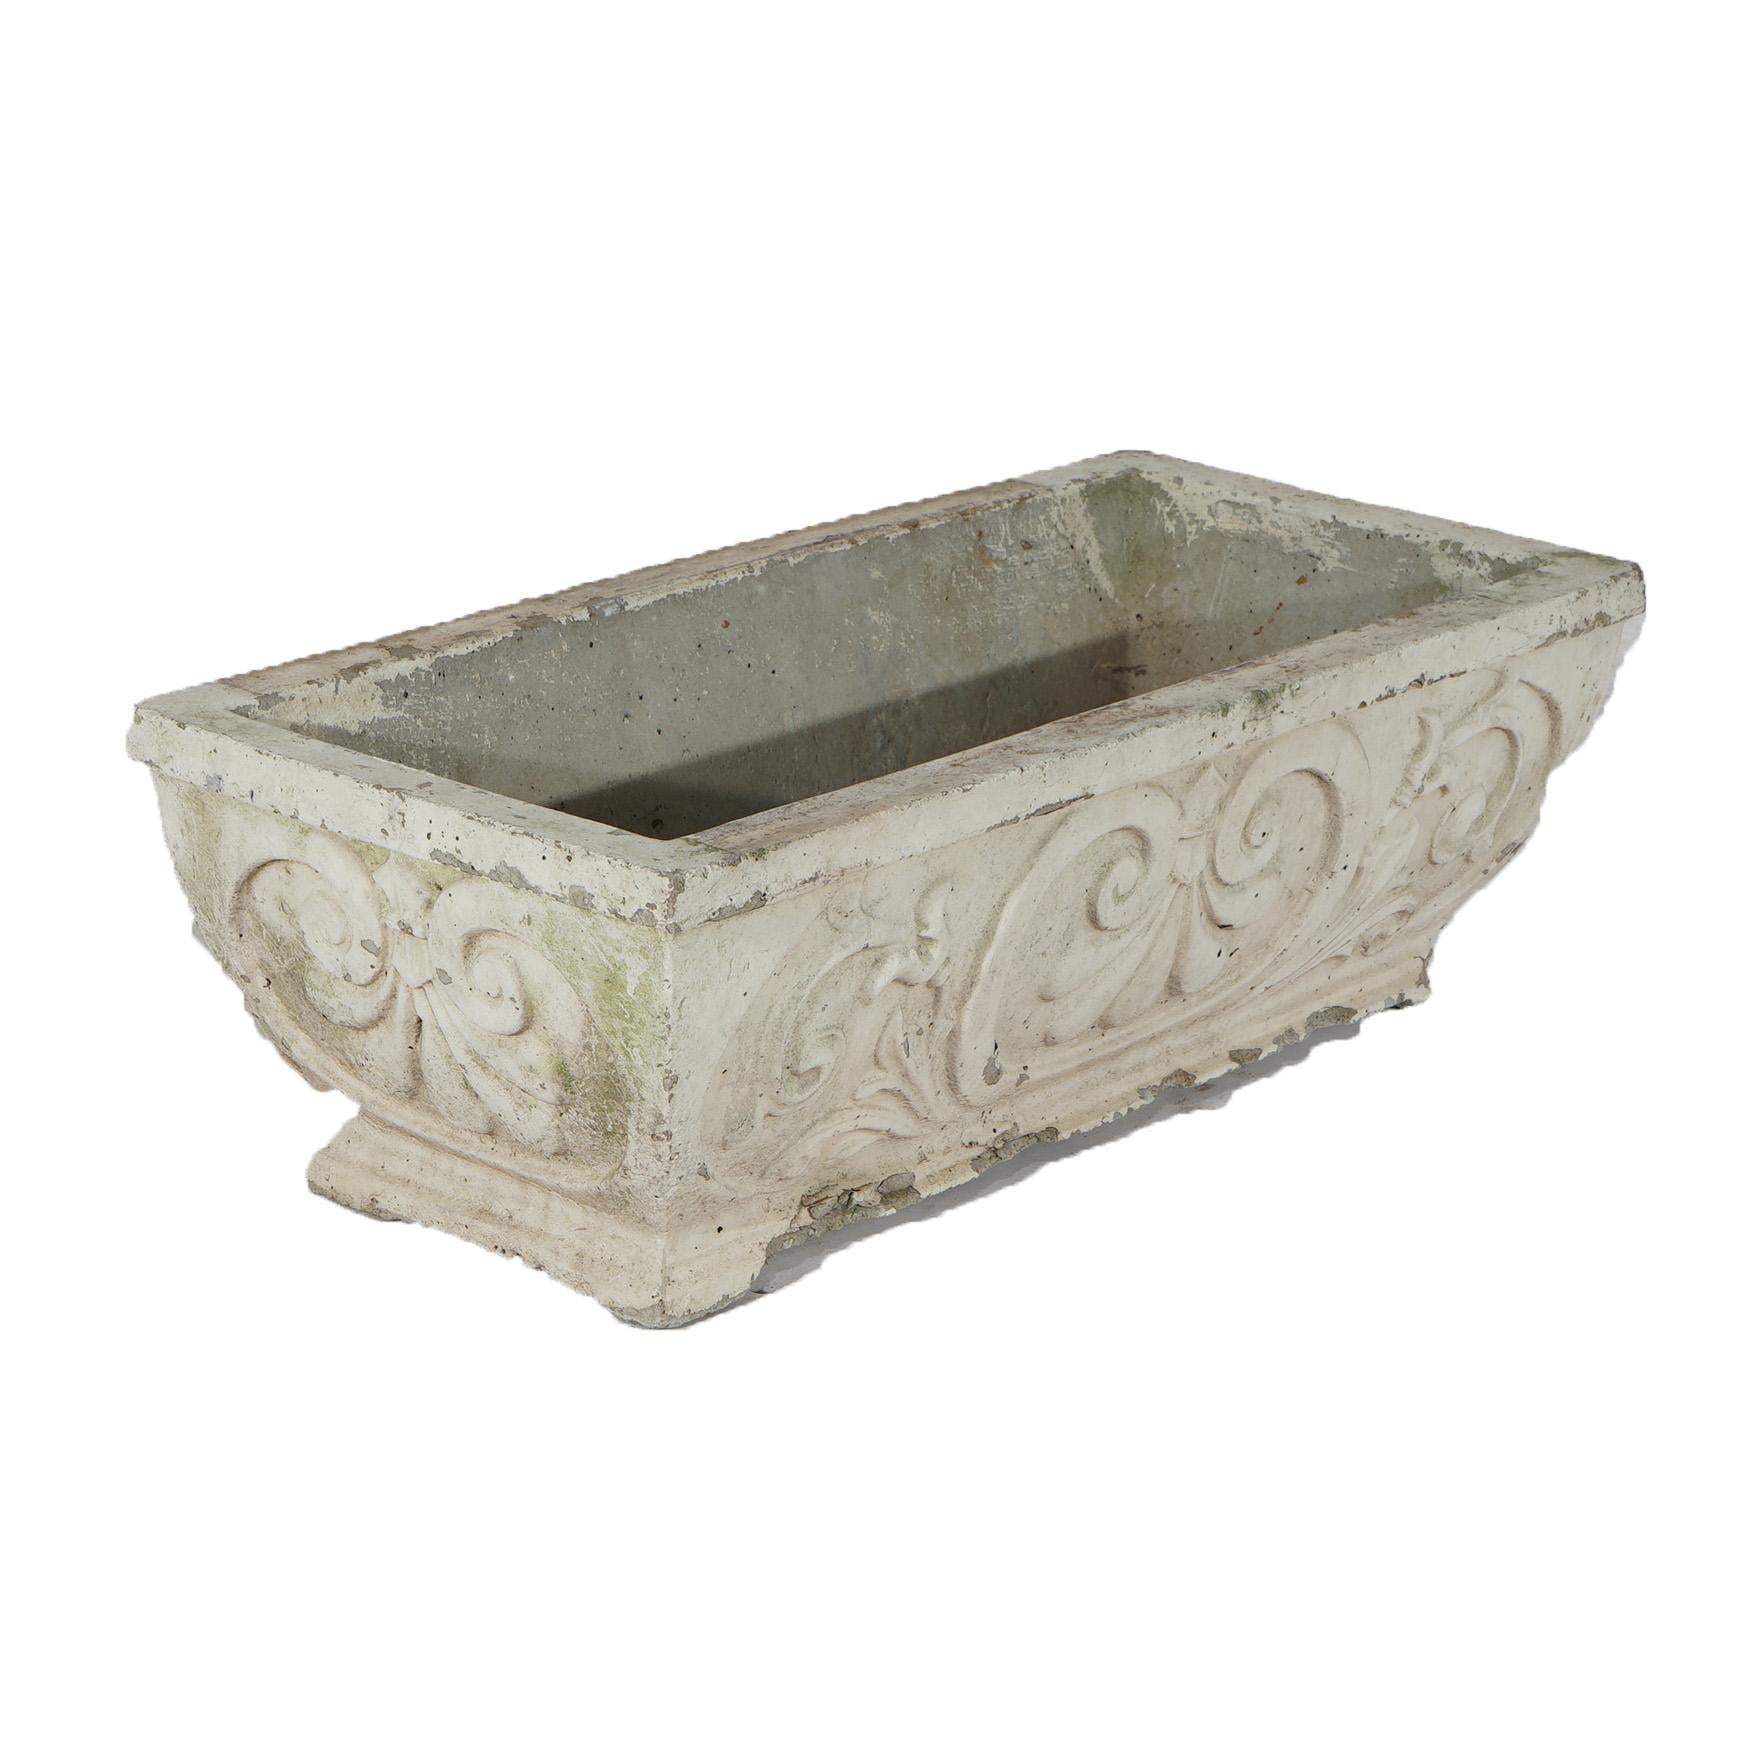 Cast Hardstone Long Garden or Patio Planter with Scroll Work in Relief 20th C In Good Condition For Sale In Big Flats, NY